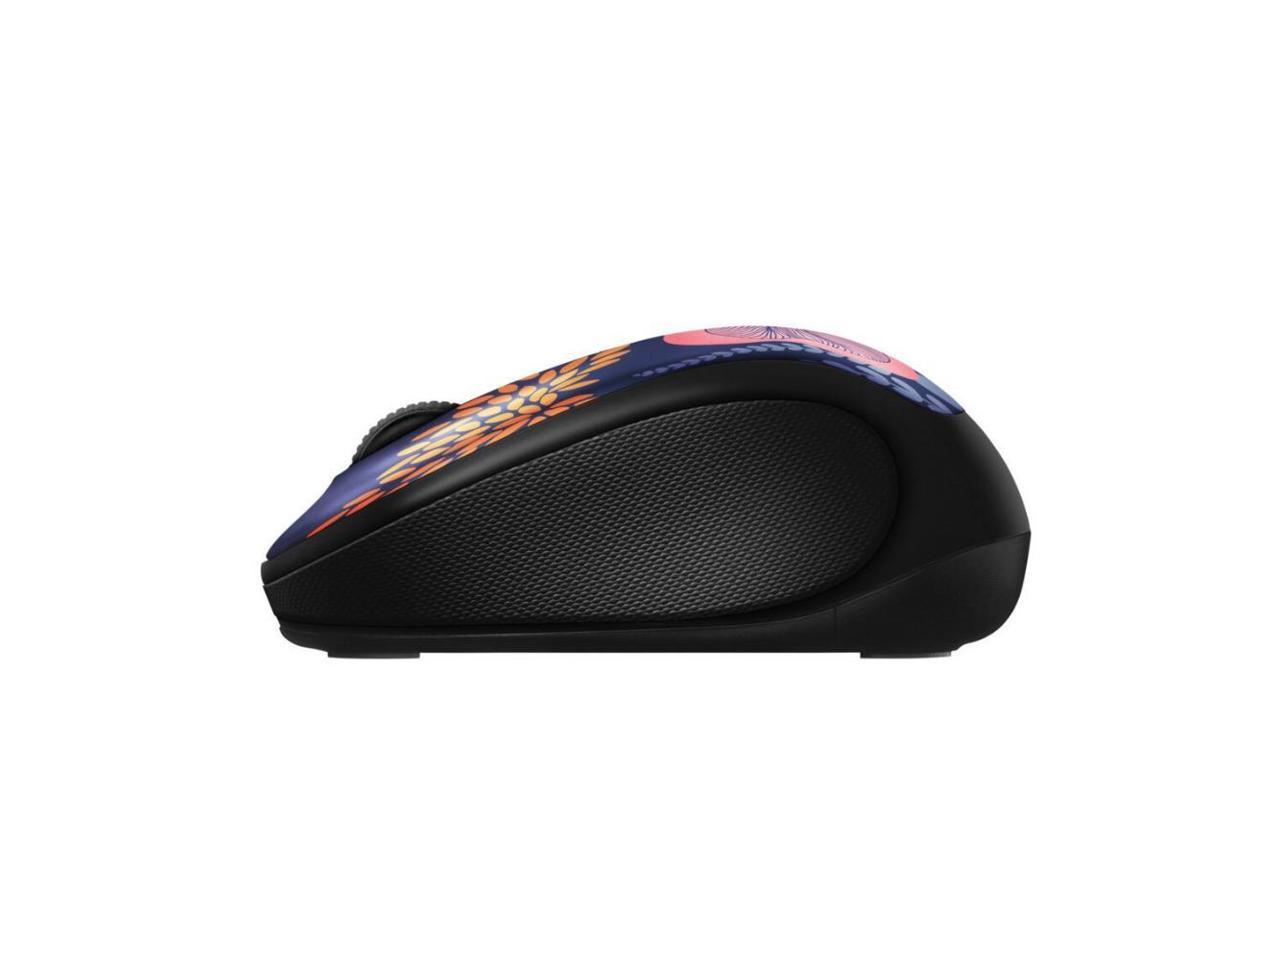 Logitech 910005657 M325c Wireless Mouse in Forest Floral